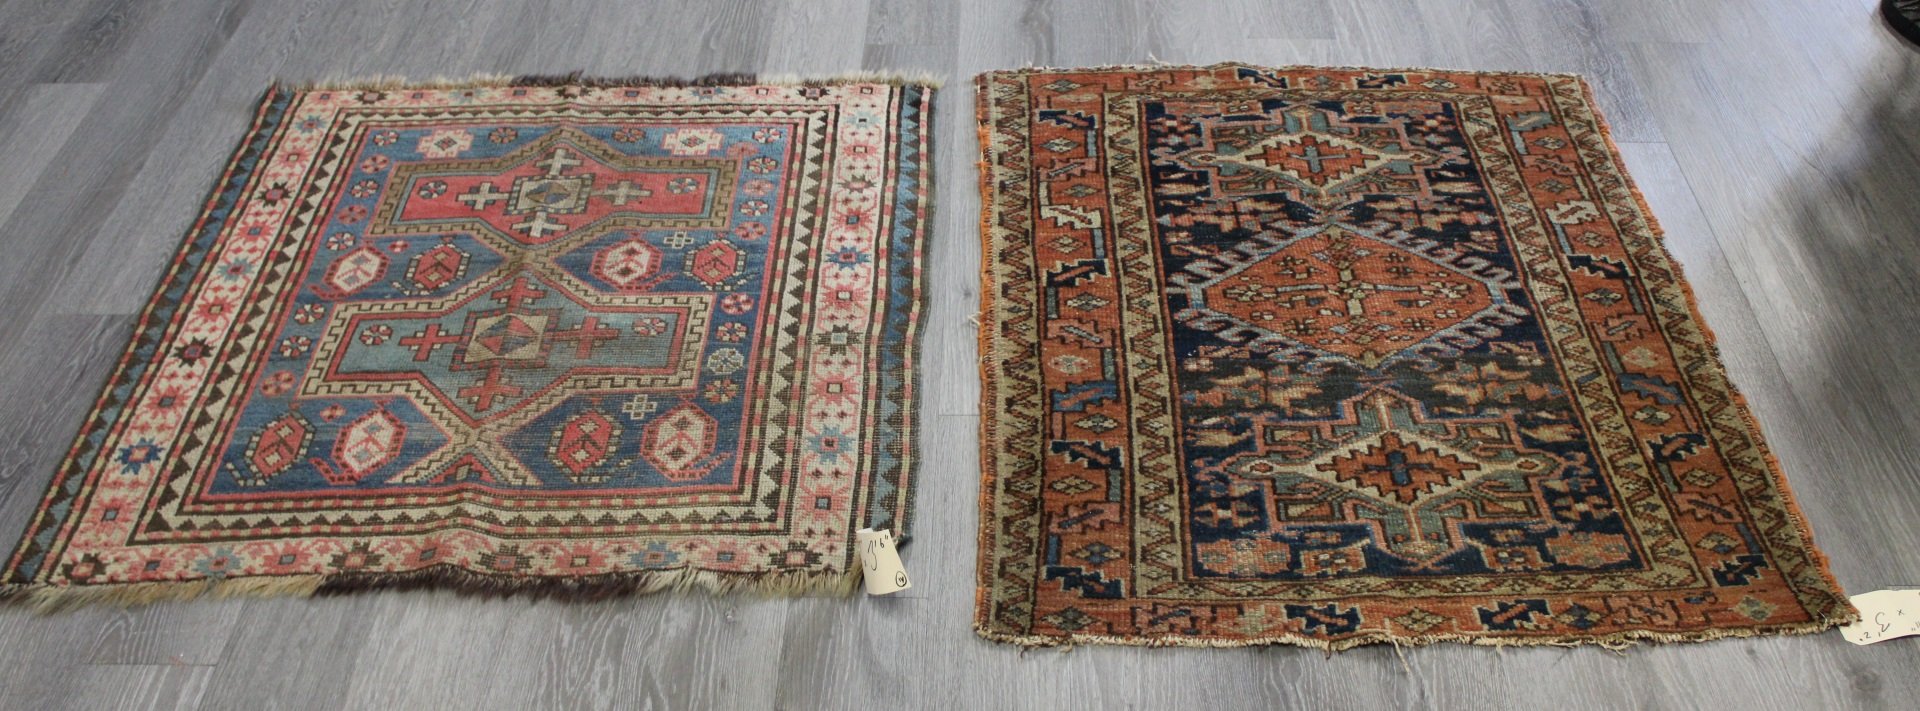 2 ANTIQUE AND FINELY HAND WOVEN